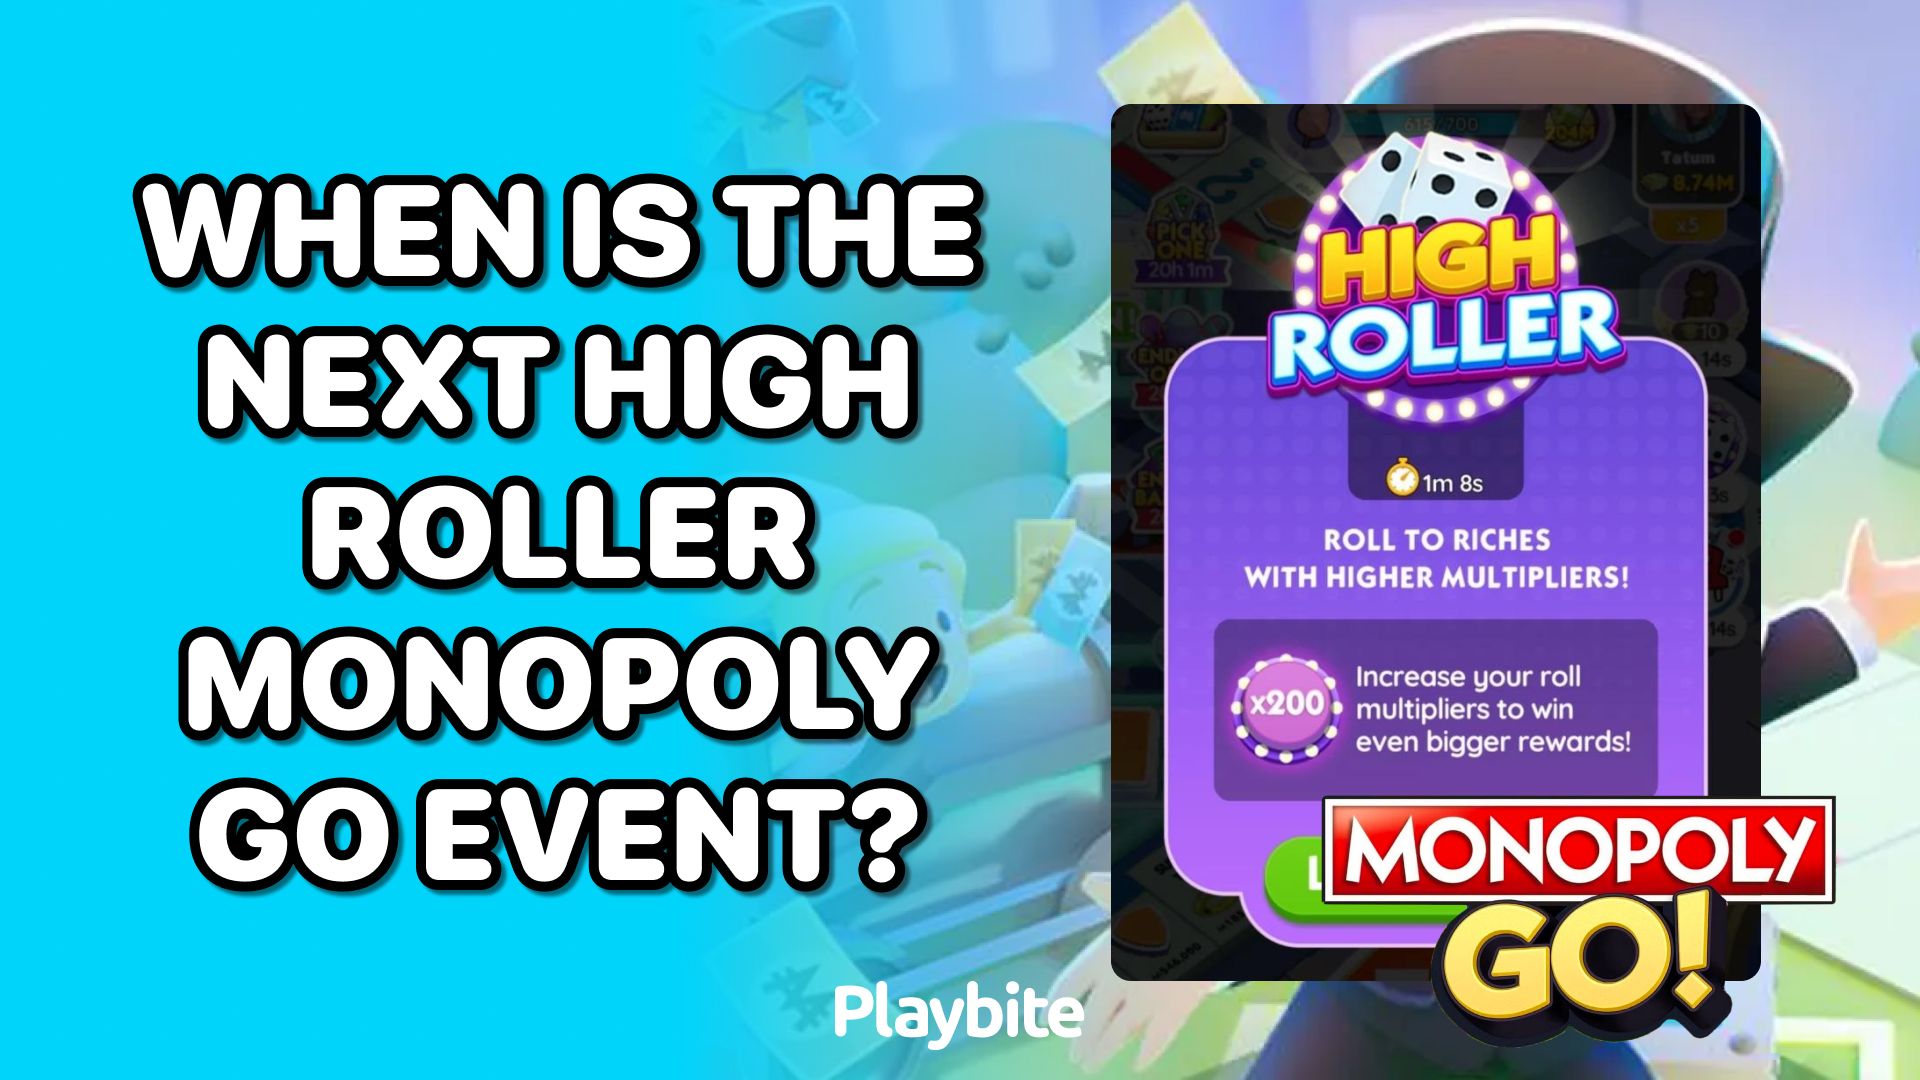 When is the Next High Roller Monopoly Go Event?